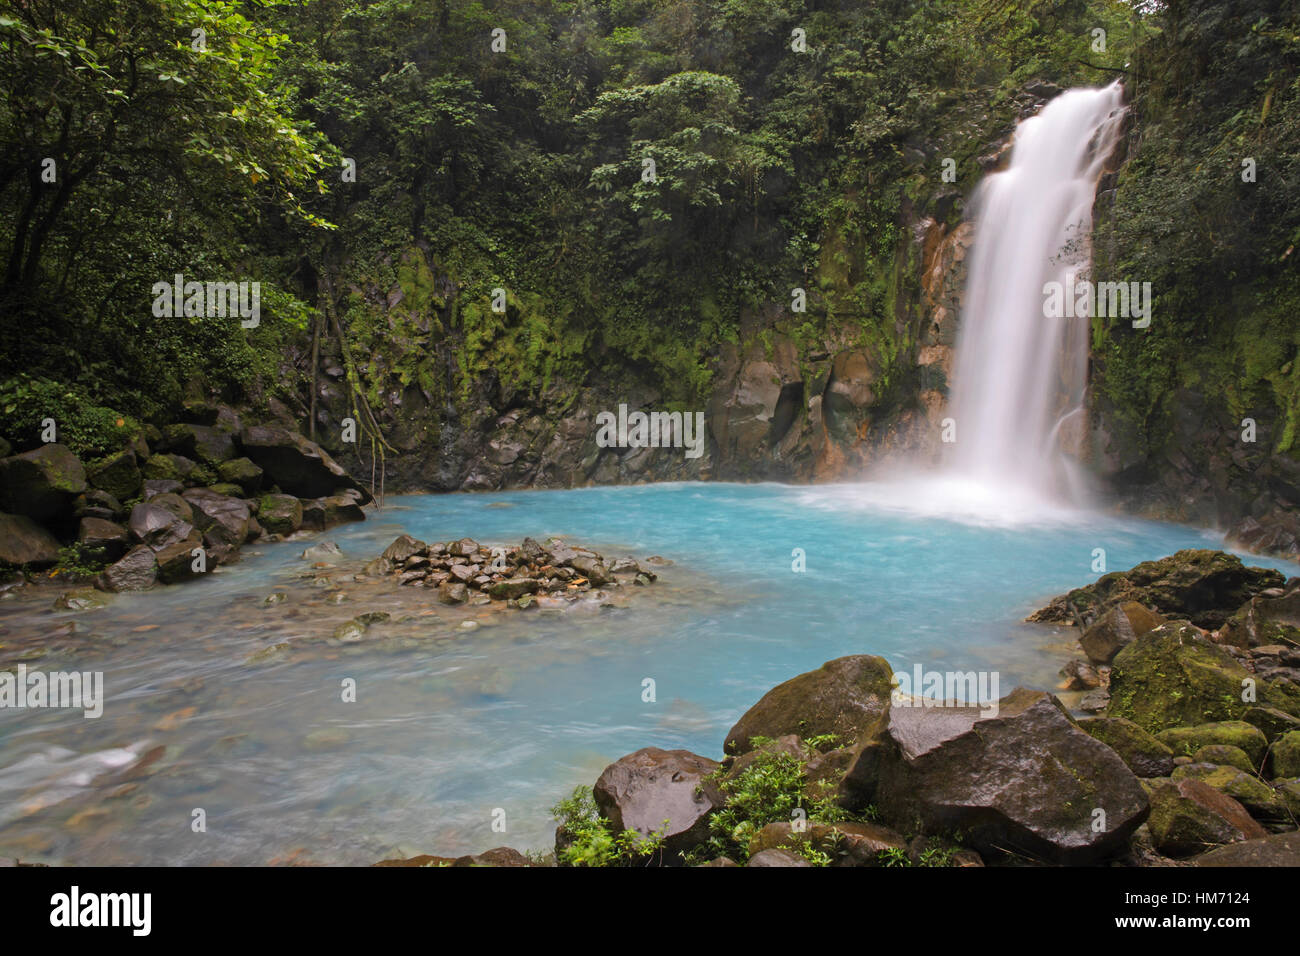 Rio Celeste (Blue River) waterfall in Tenorio Volcano National Park, Costa Rica.  The blue coloration is a result of sulphur from the volcano seeping  Stock Photo